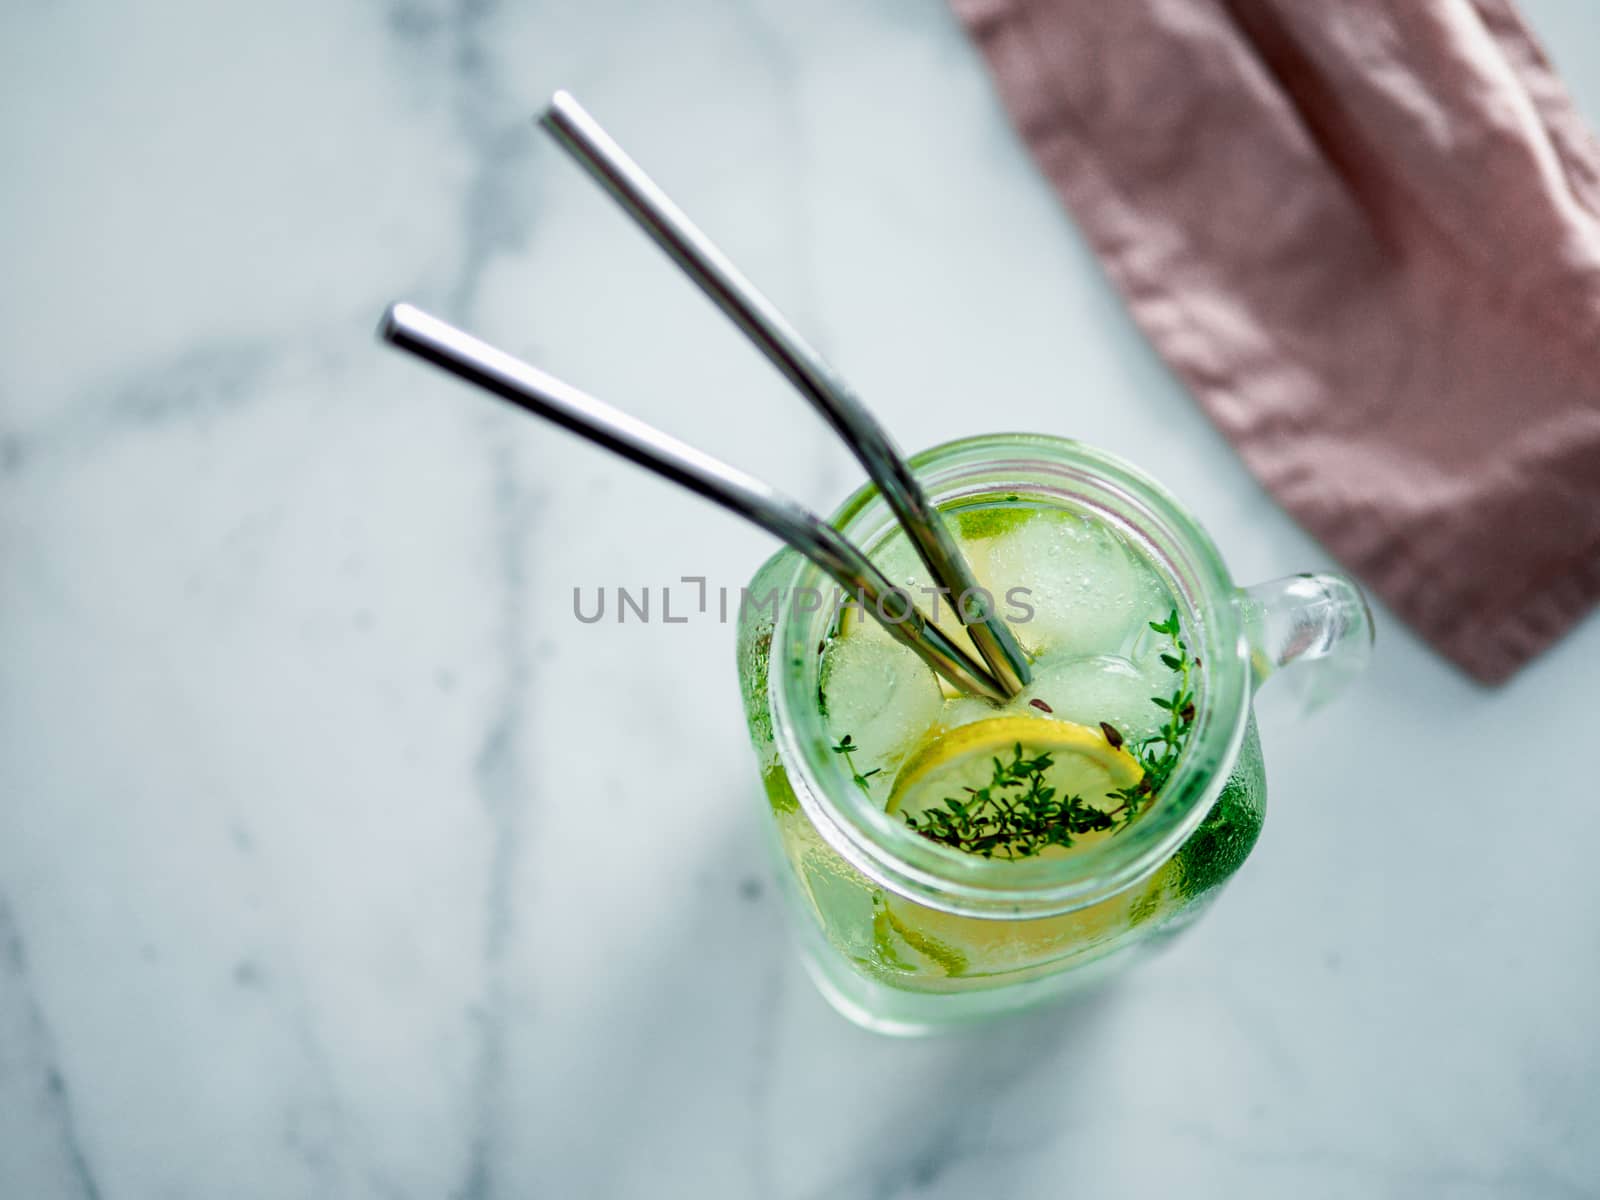 Metal drinking straws and cold drink in glass mason jar on white marble background. Top view or flat lay. Copy space for text or design. Recyclable straws, zero waste concept. Banner.